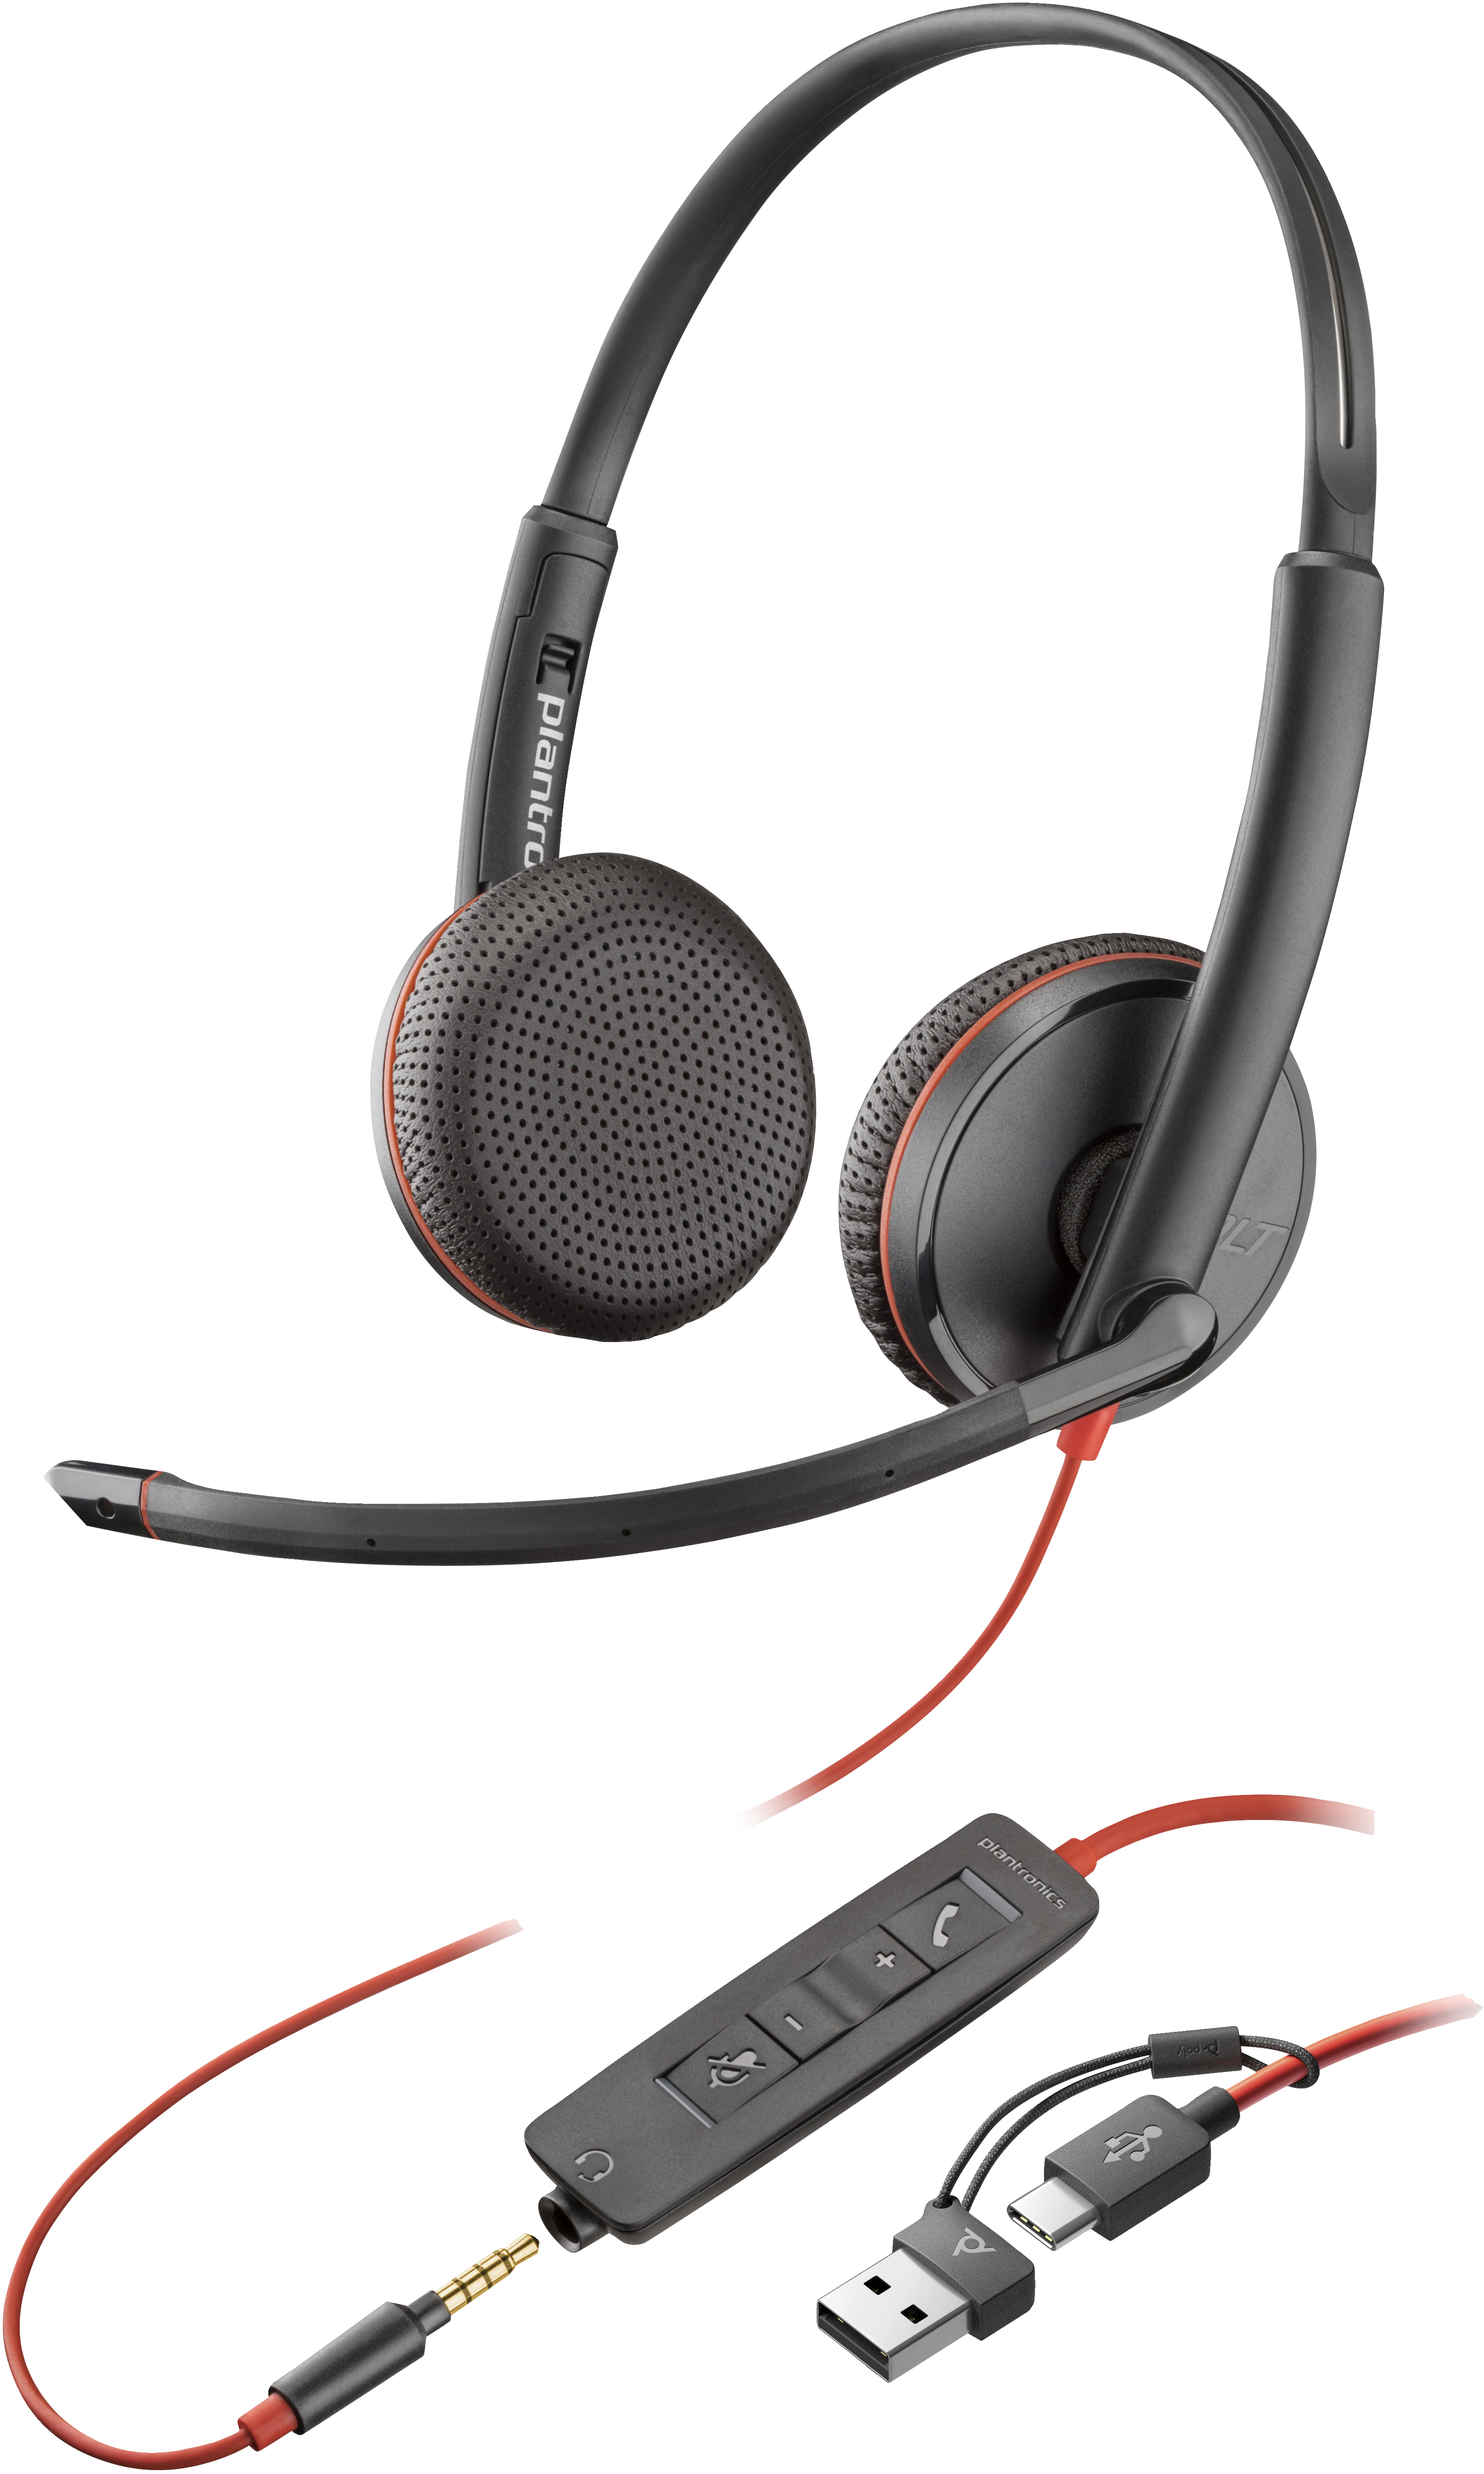 HP Poly Blackwire 3225 - Blackwire 3200 Series - Headset